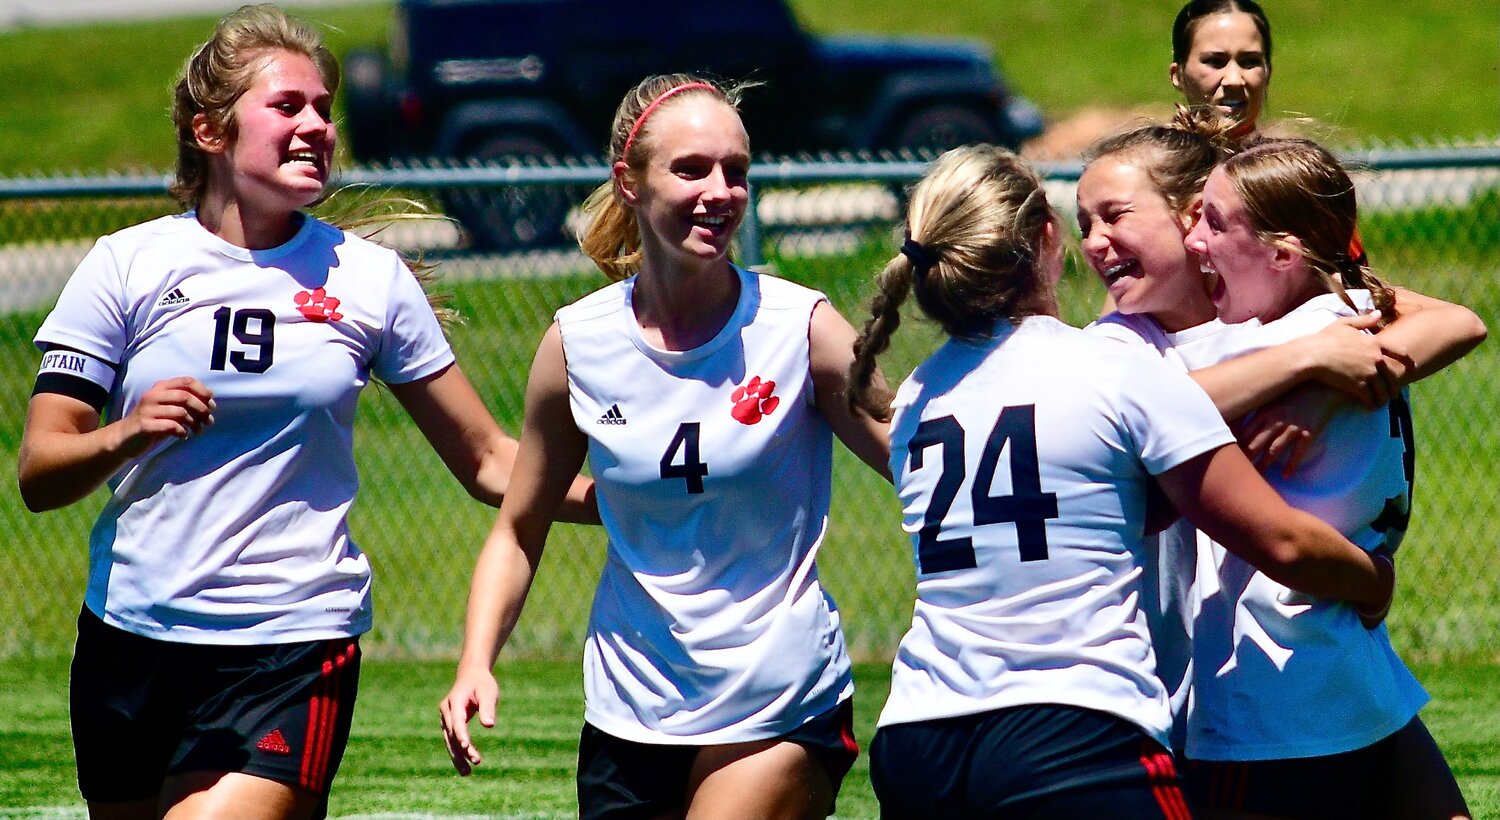 OZARK'S ANNABELLE KRUSE is all smiles while receiving congrats from teammates for a goal.